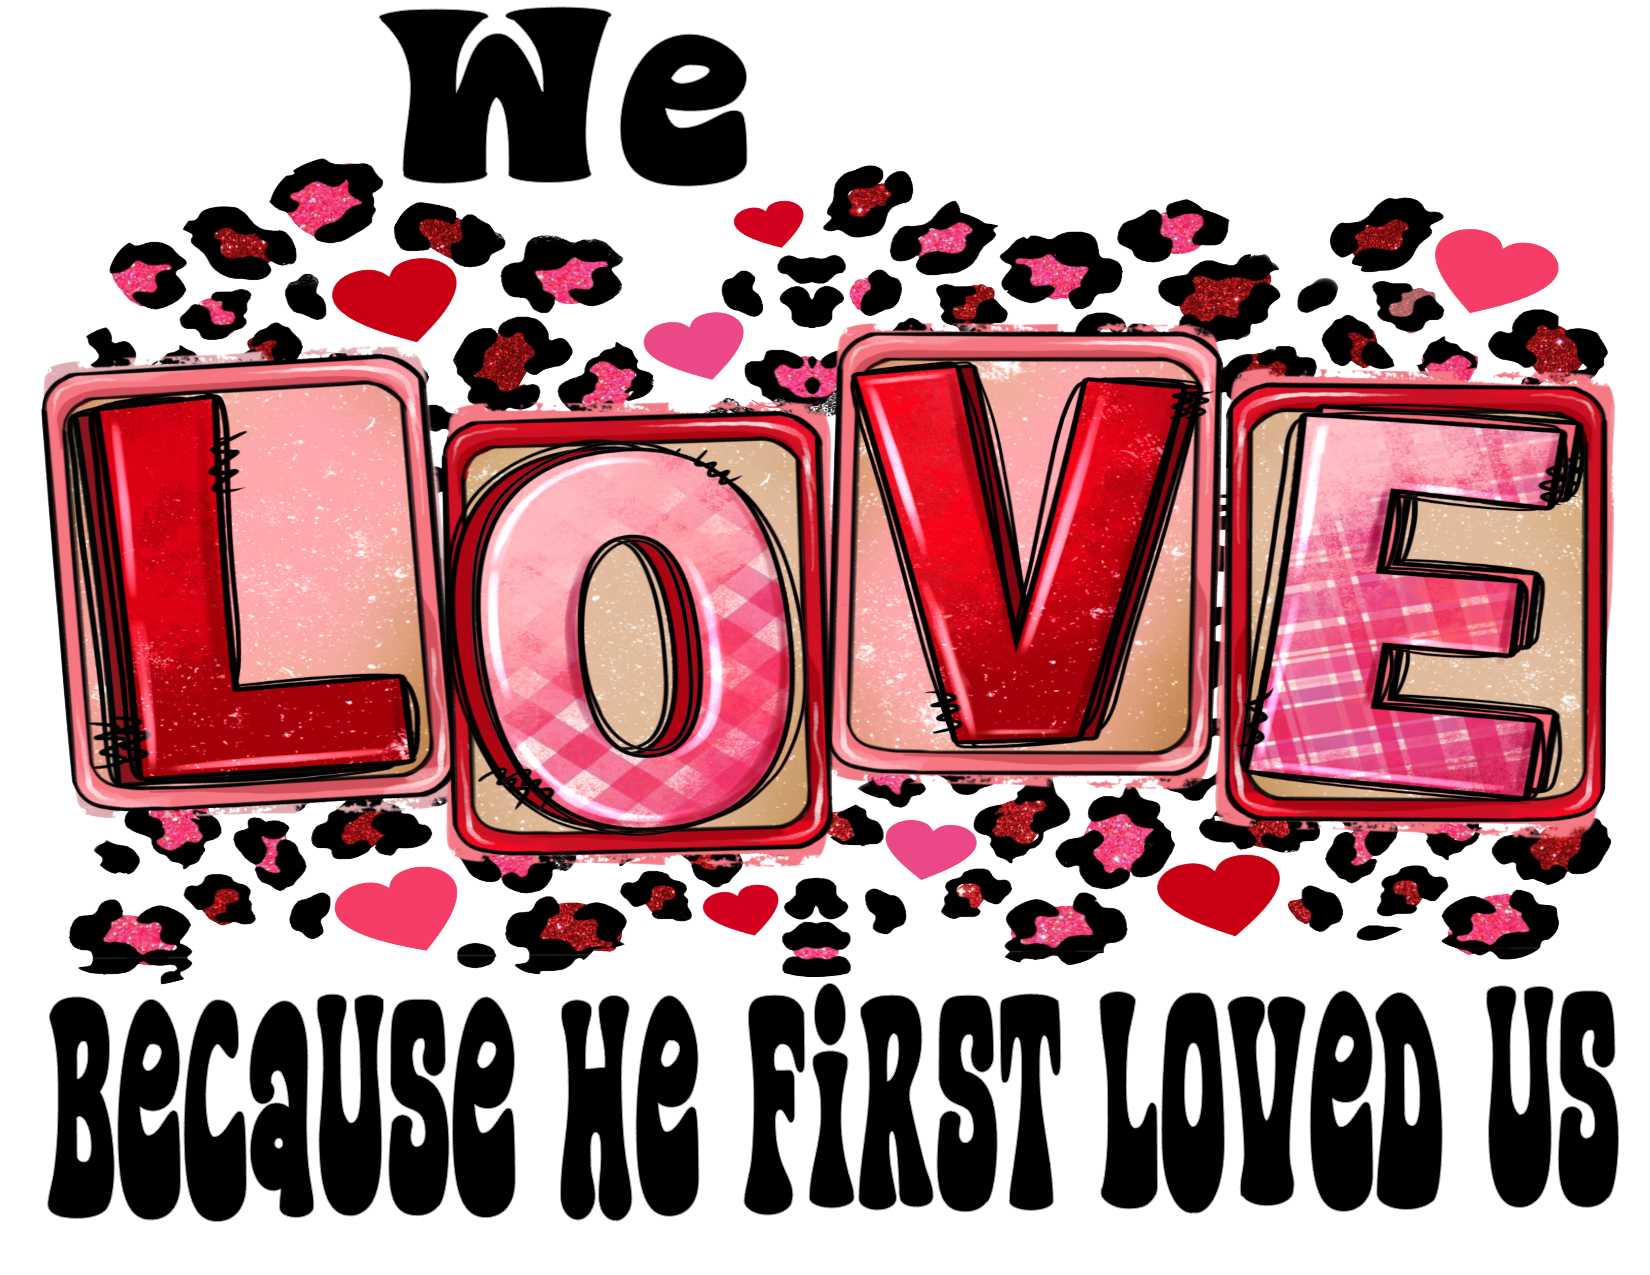 #269 We LOVE because He first loved us